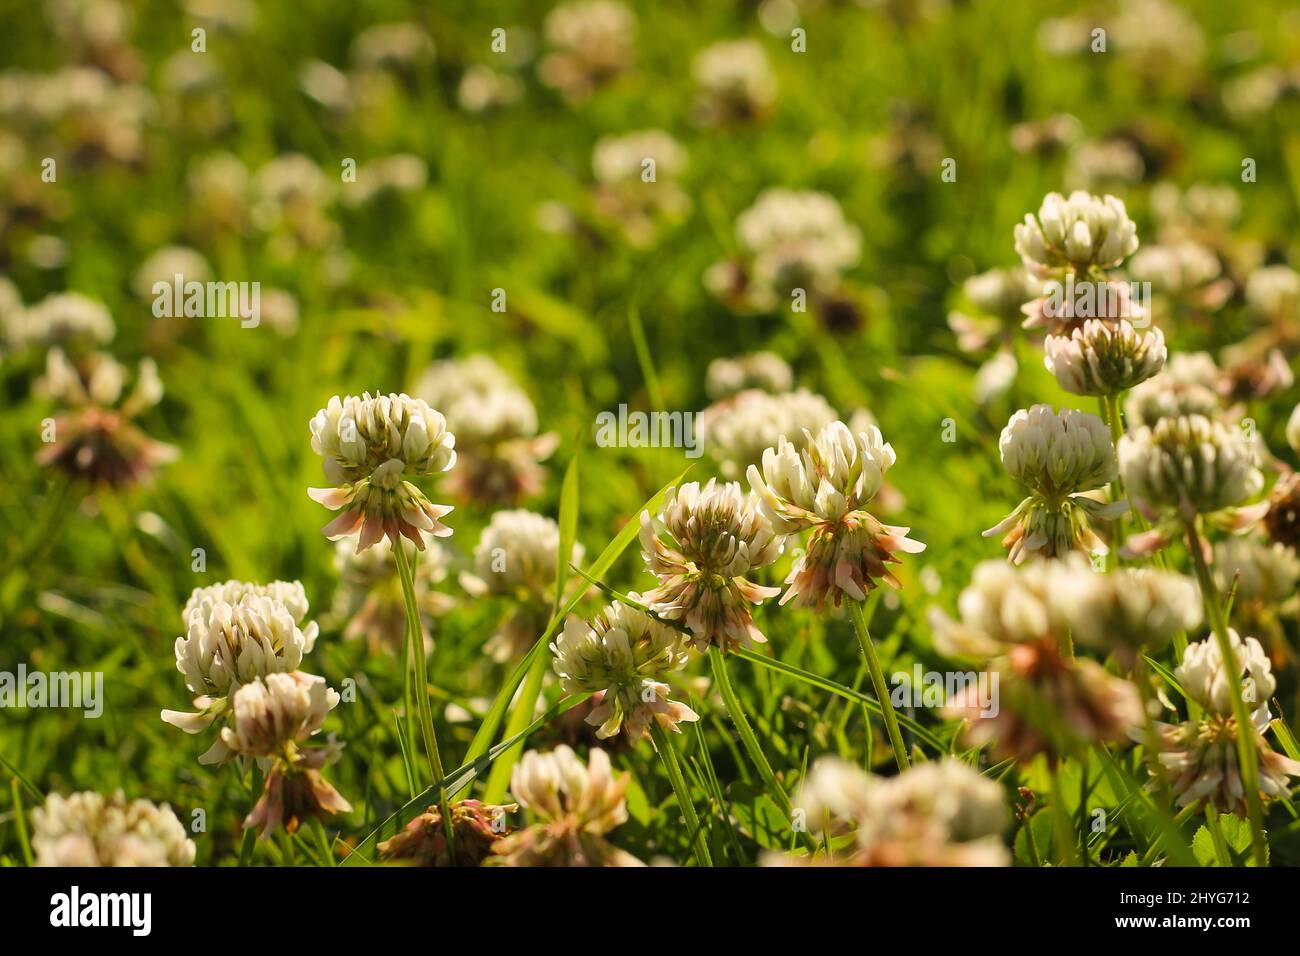 Trifolium pratense, the white clover in the meadow. White-flowered clover and Poa annua, or annual meadow grass in the sunlight. Stock Photo